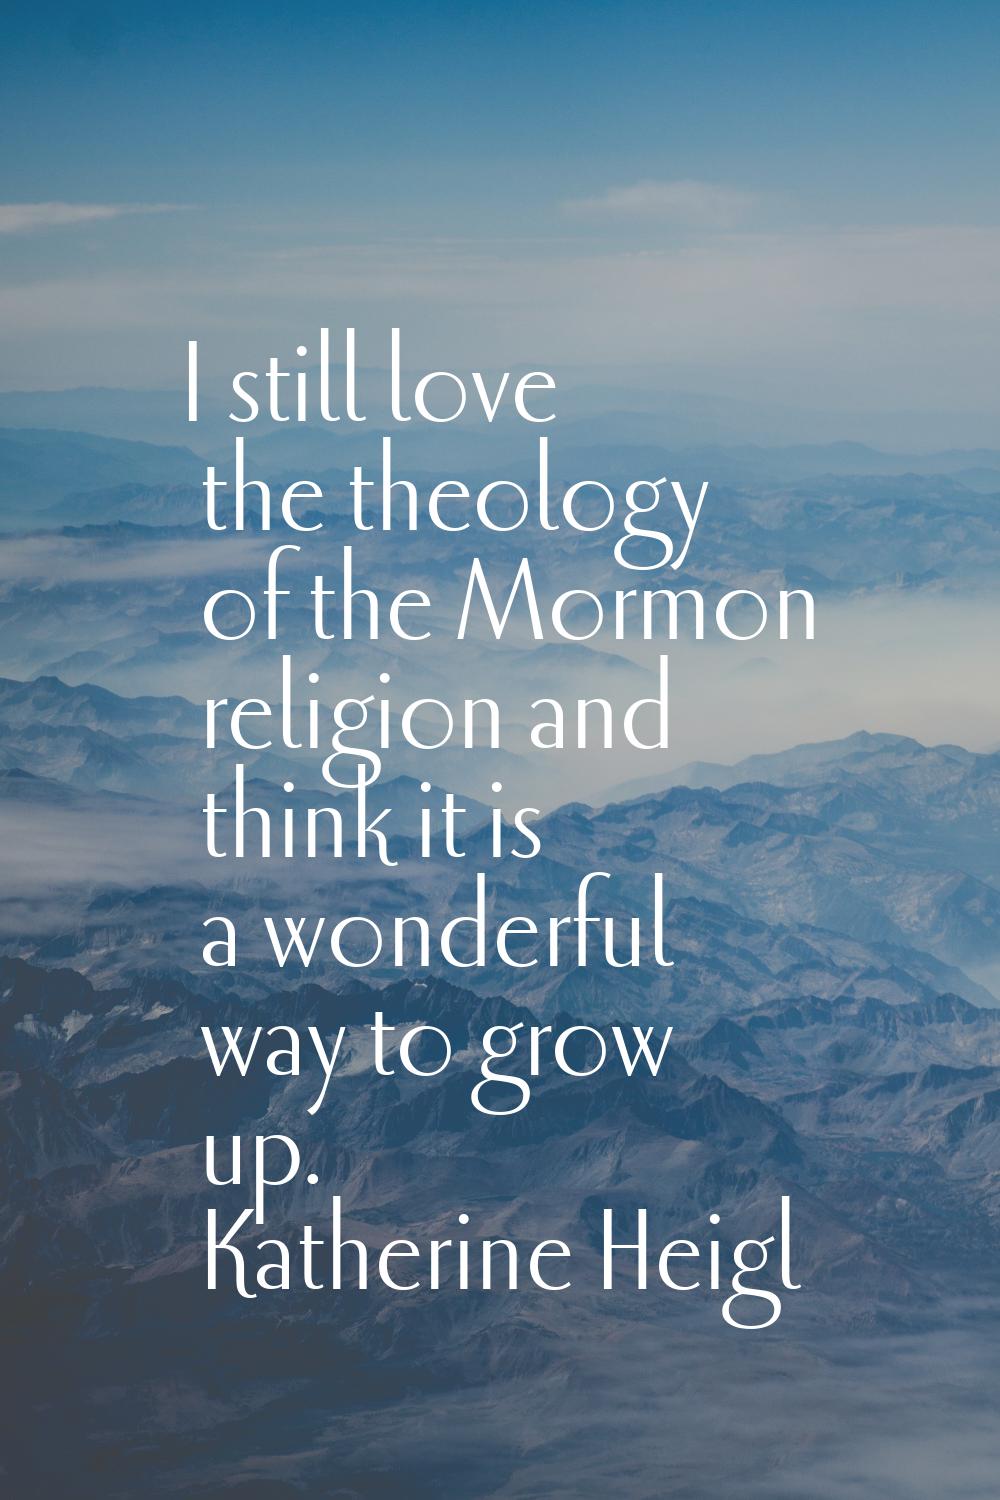 I still love the theology of the Mormon religion and think it is a wonderful way to grow up.